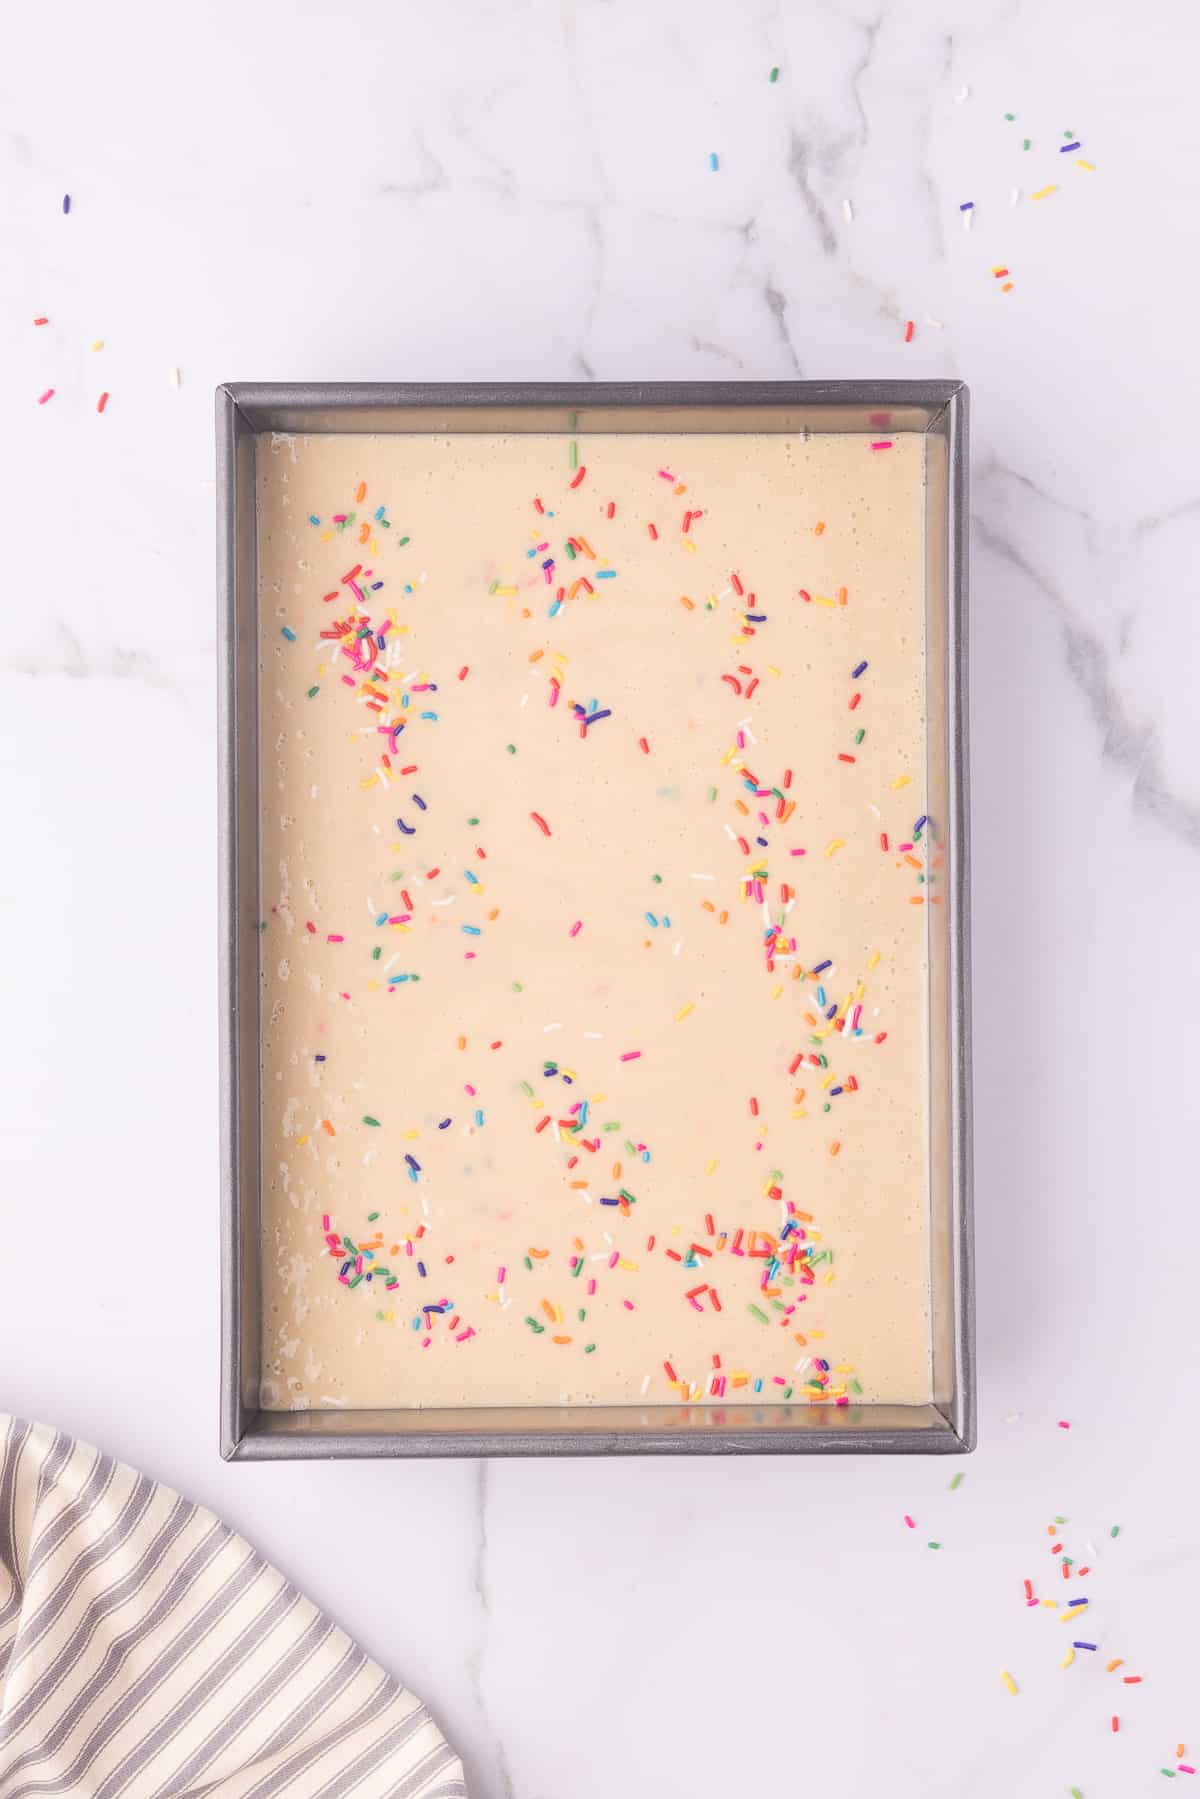 Large rectangle pan with funfetti batter on marble background. 